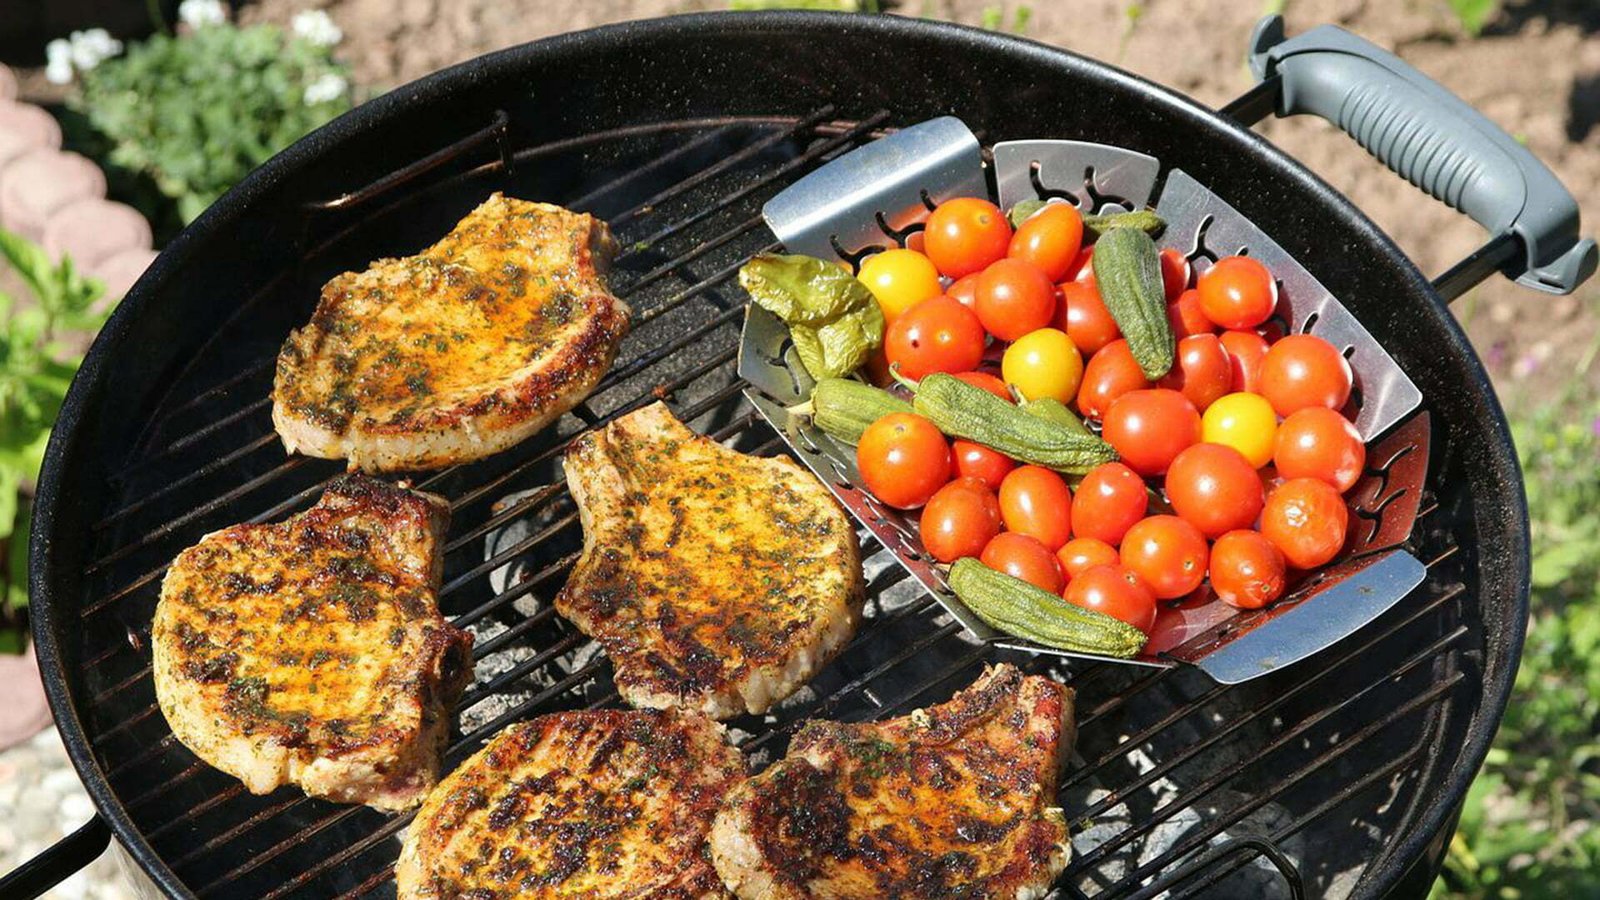 https://yeenegrills.com/wp-content/uploads/2022/05/barbecue-grill-accessory.jpg